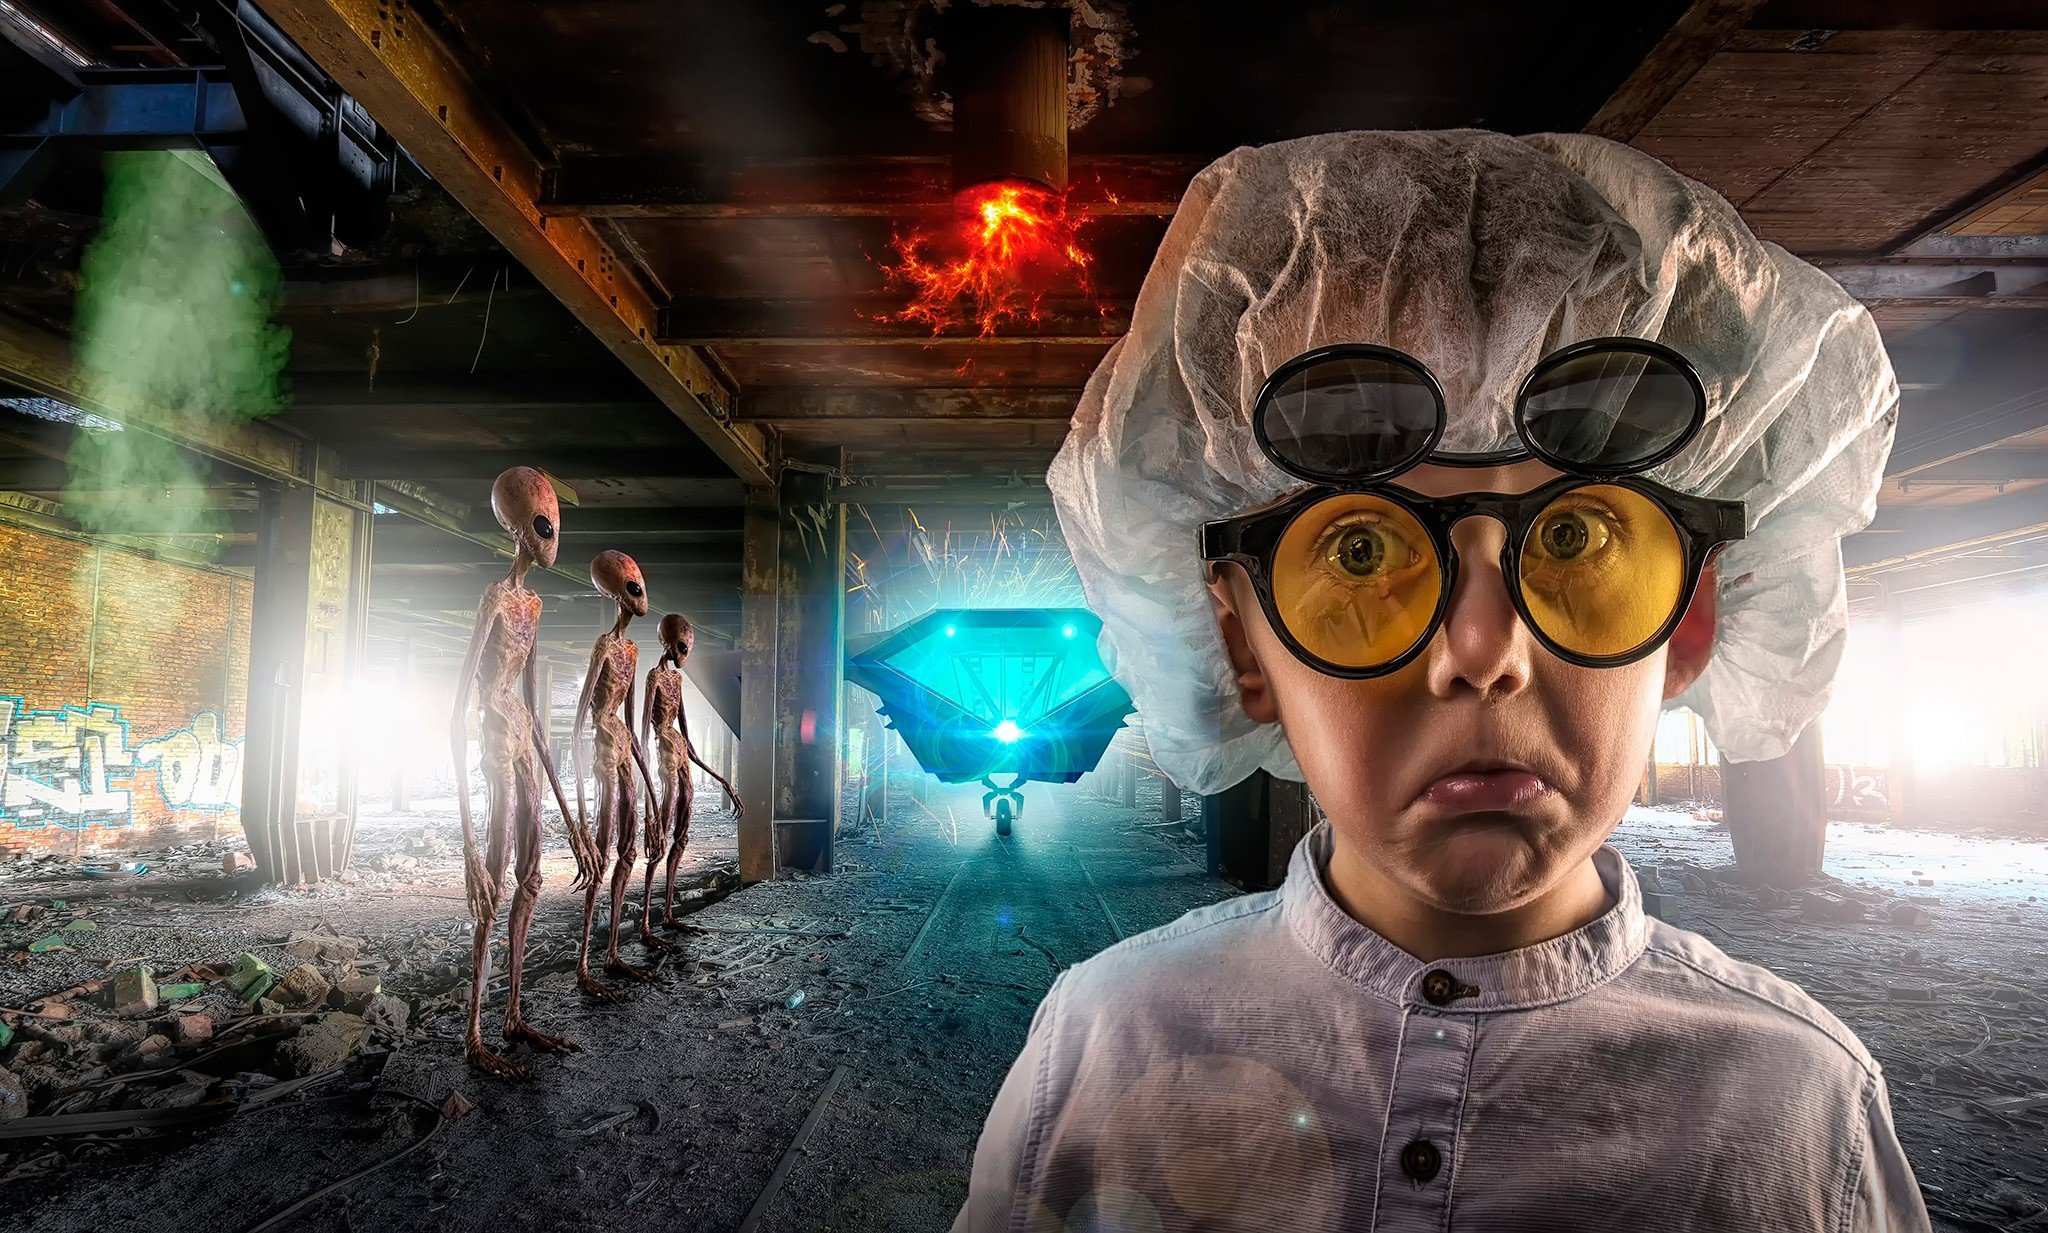 photo manipulation, Face, Glasses, Lab coats, Aliens, Abandoned, Building, Fire, Dust, Bricks, Rooftops Wallpaper